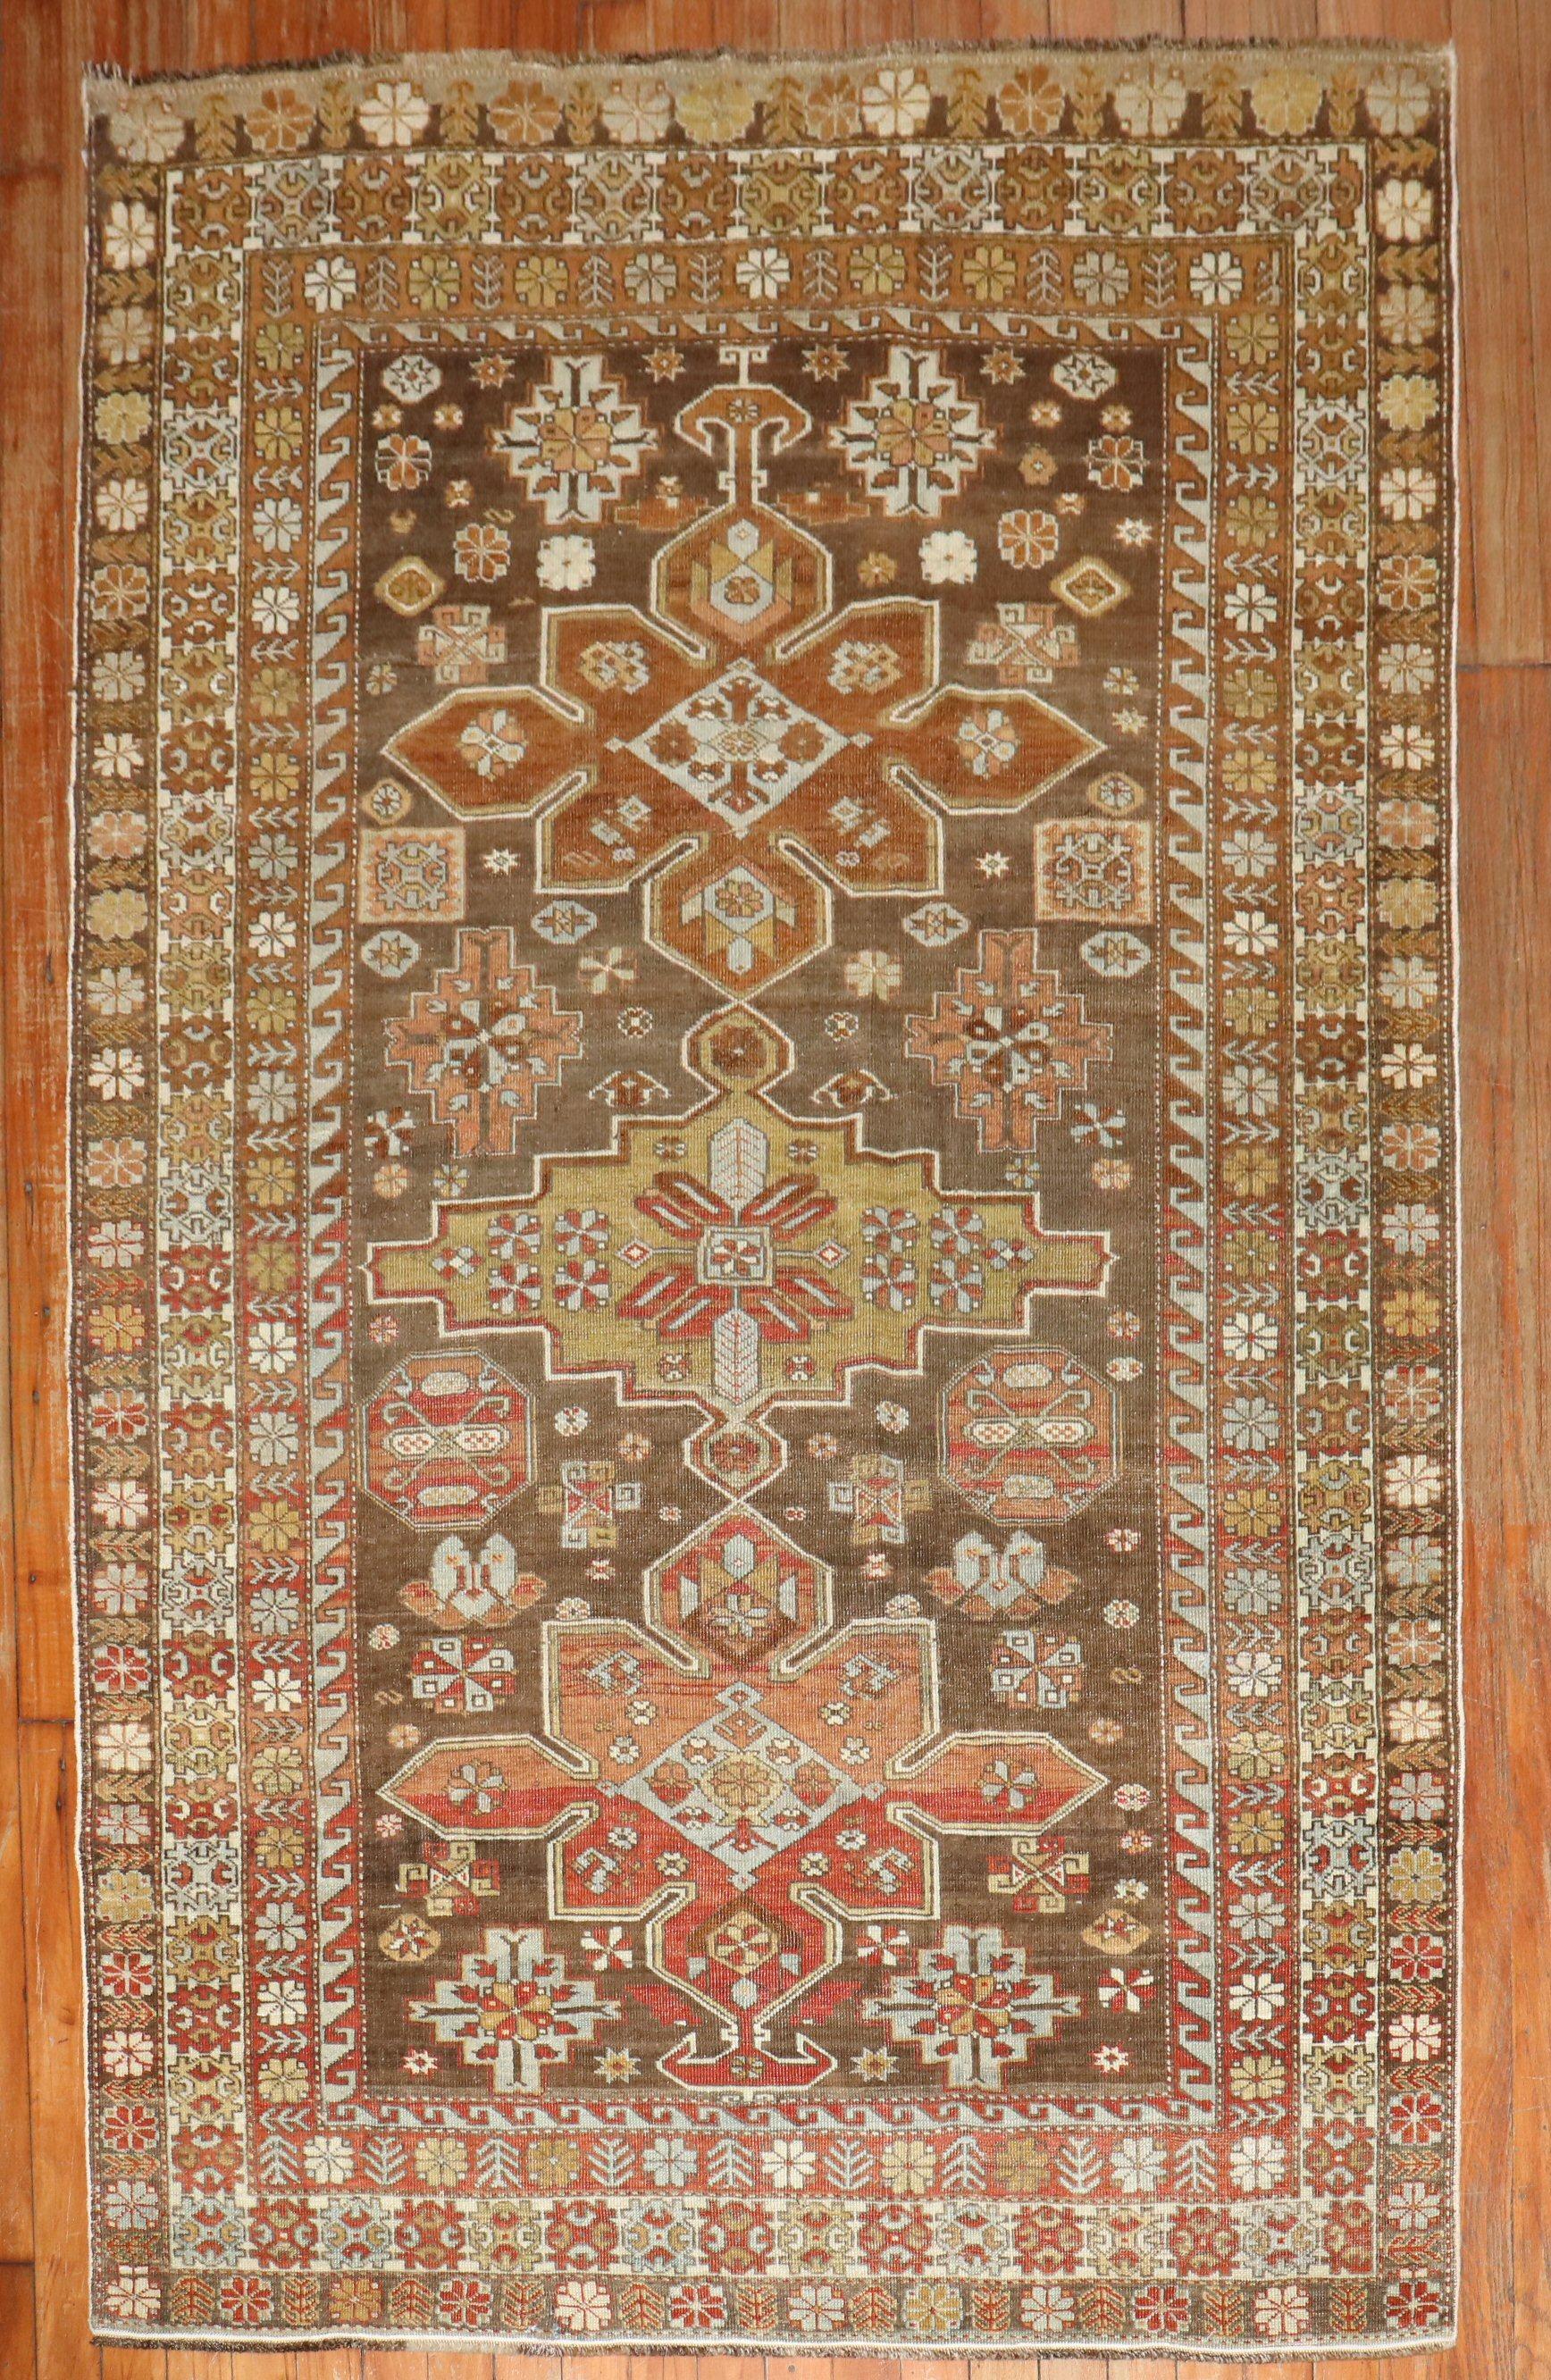 A Caucasian rug from the 2nd quarter of the 20th century

Measures: 3'11'' x 6'1''

Antique Caucasian rugs from the Shirvan district village are still considered one of the best decorative and collector type of rugs from that the Caucasian